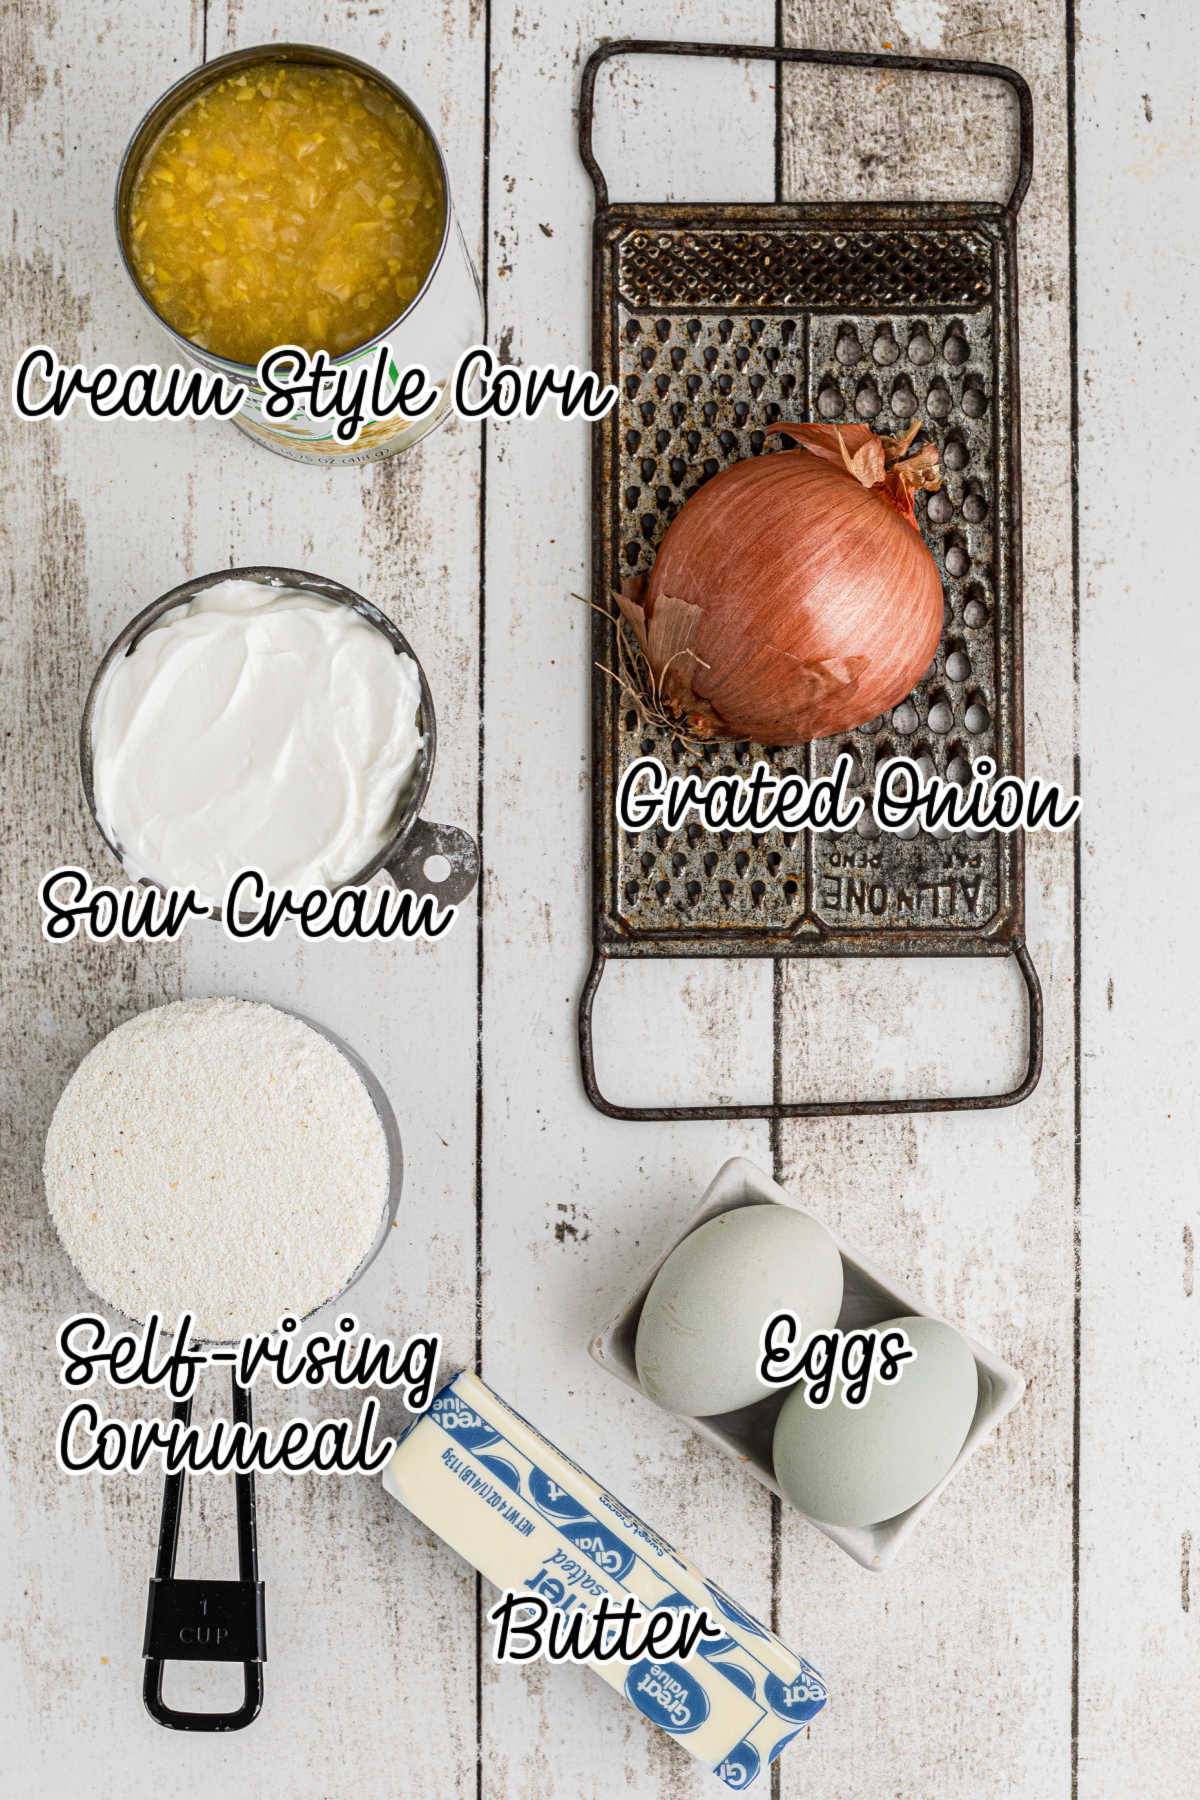 Overhead shot of the ingredients needed to make sour cream cornbread, with text overlay.